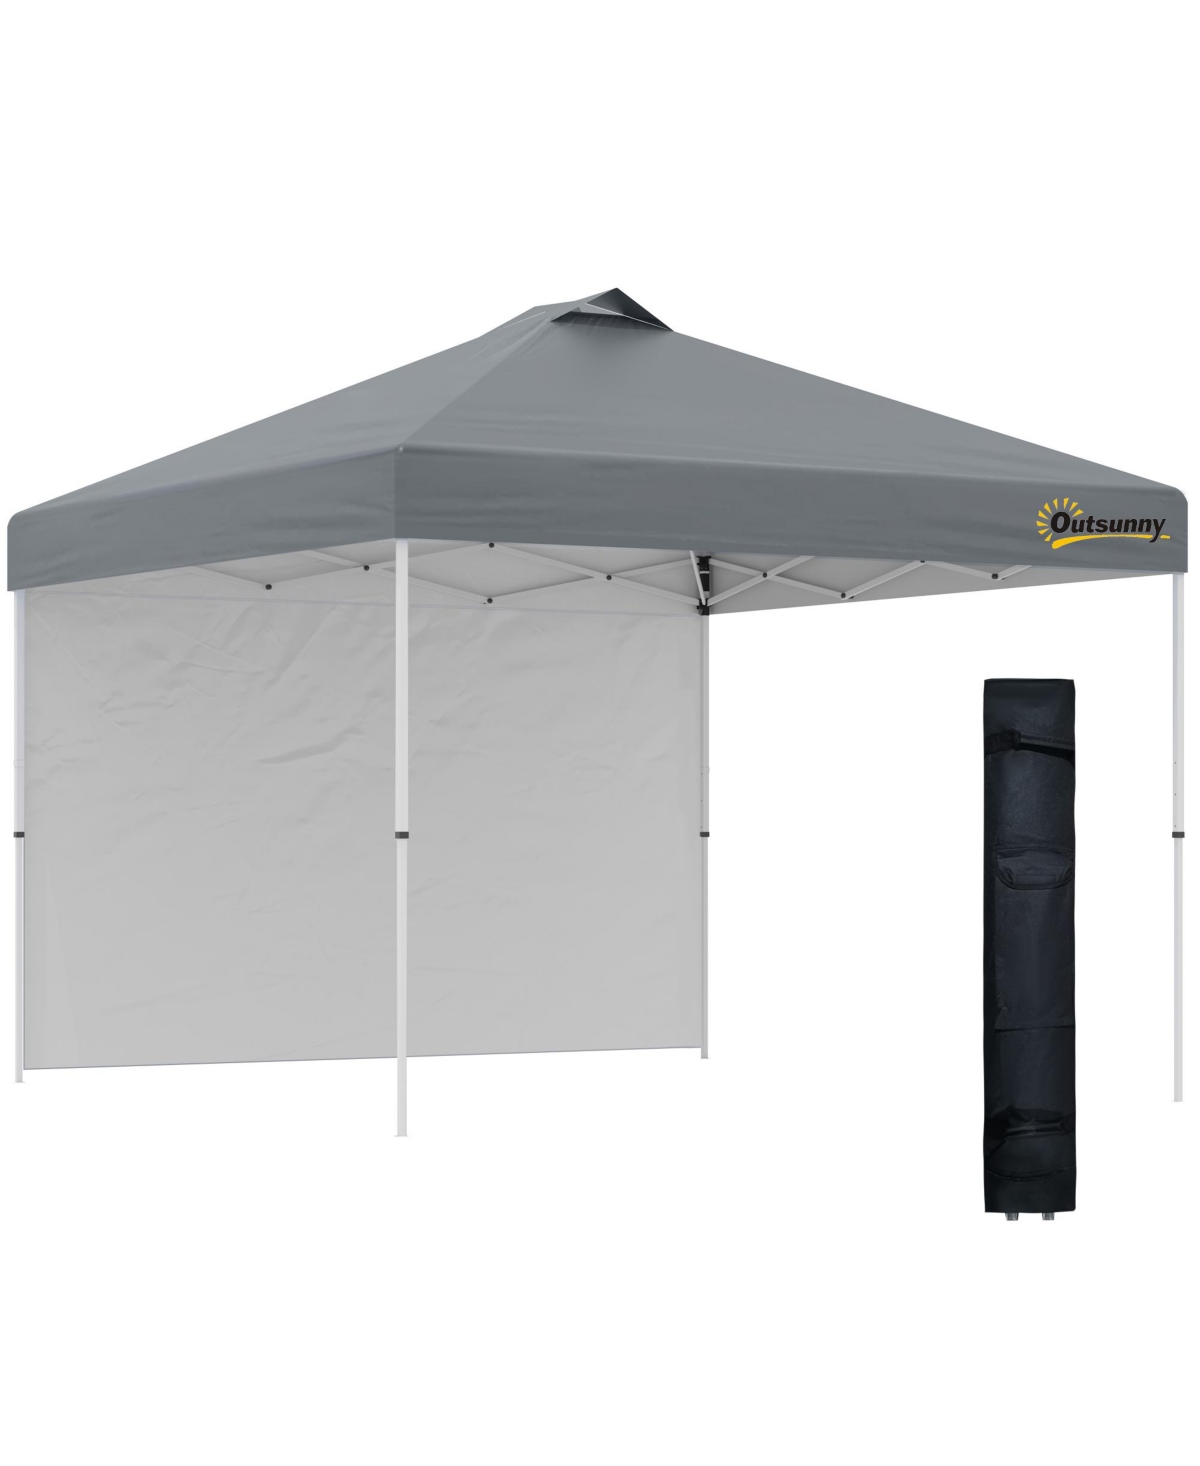 10' Pop-Up Canopy Party Tent with 1 Sidewall, Rolling Carry Bag on Wheels, Adjustable Height, Folding Outdoor Shelter, Grey - Grey